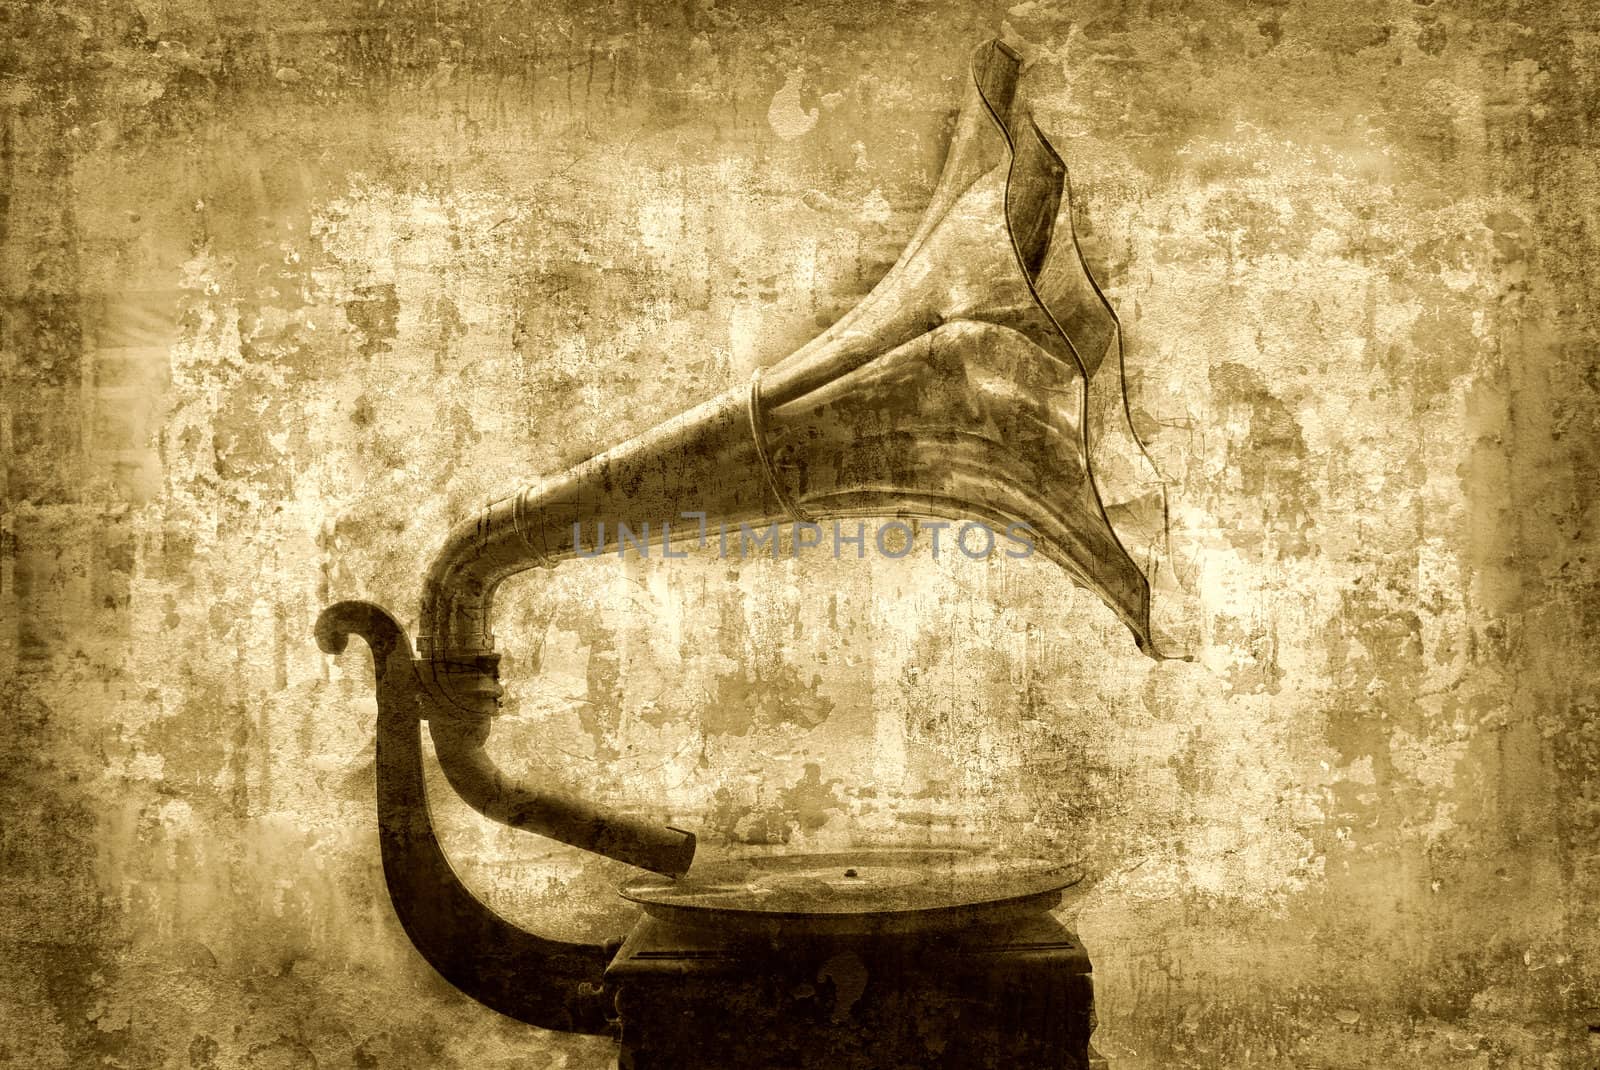 My grandfathers first gramophone for 78rpm records. More of my images worked together to reflect age and time.